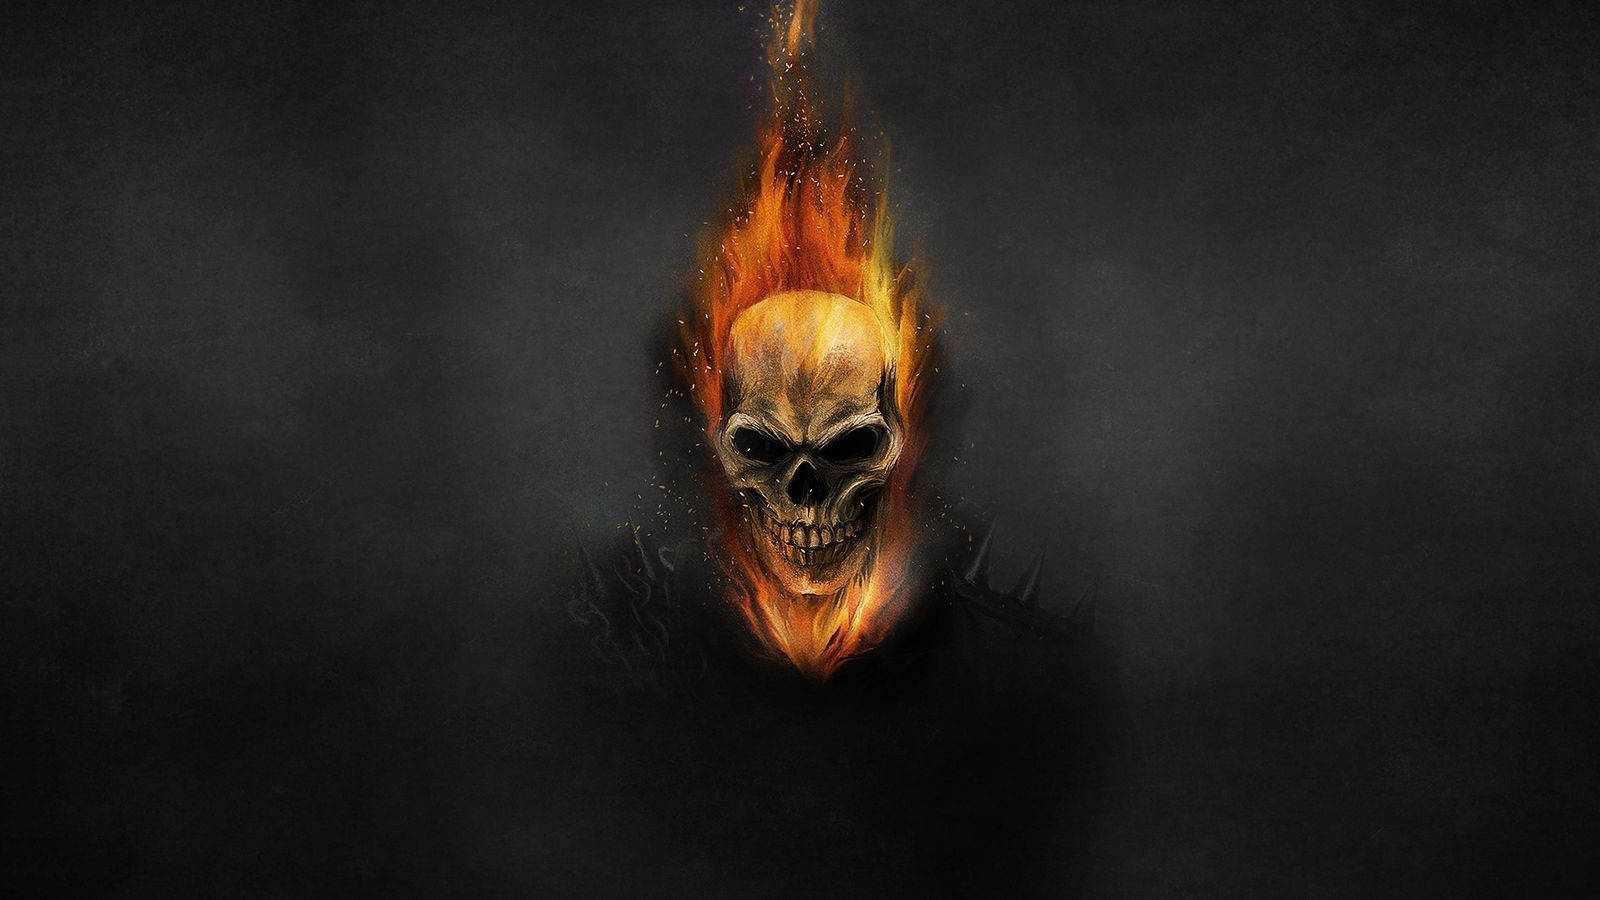 Ghost Rider Projects | Photos, videos, logos, illustrations and branding on  Behance